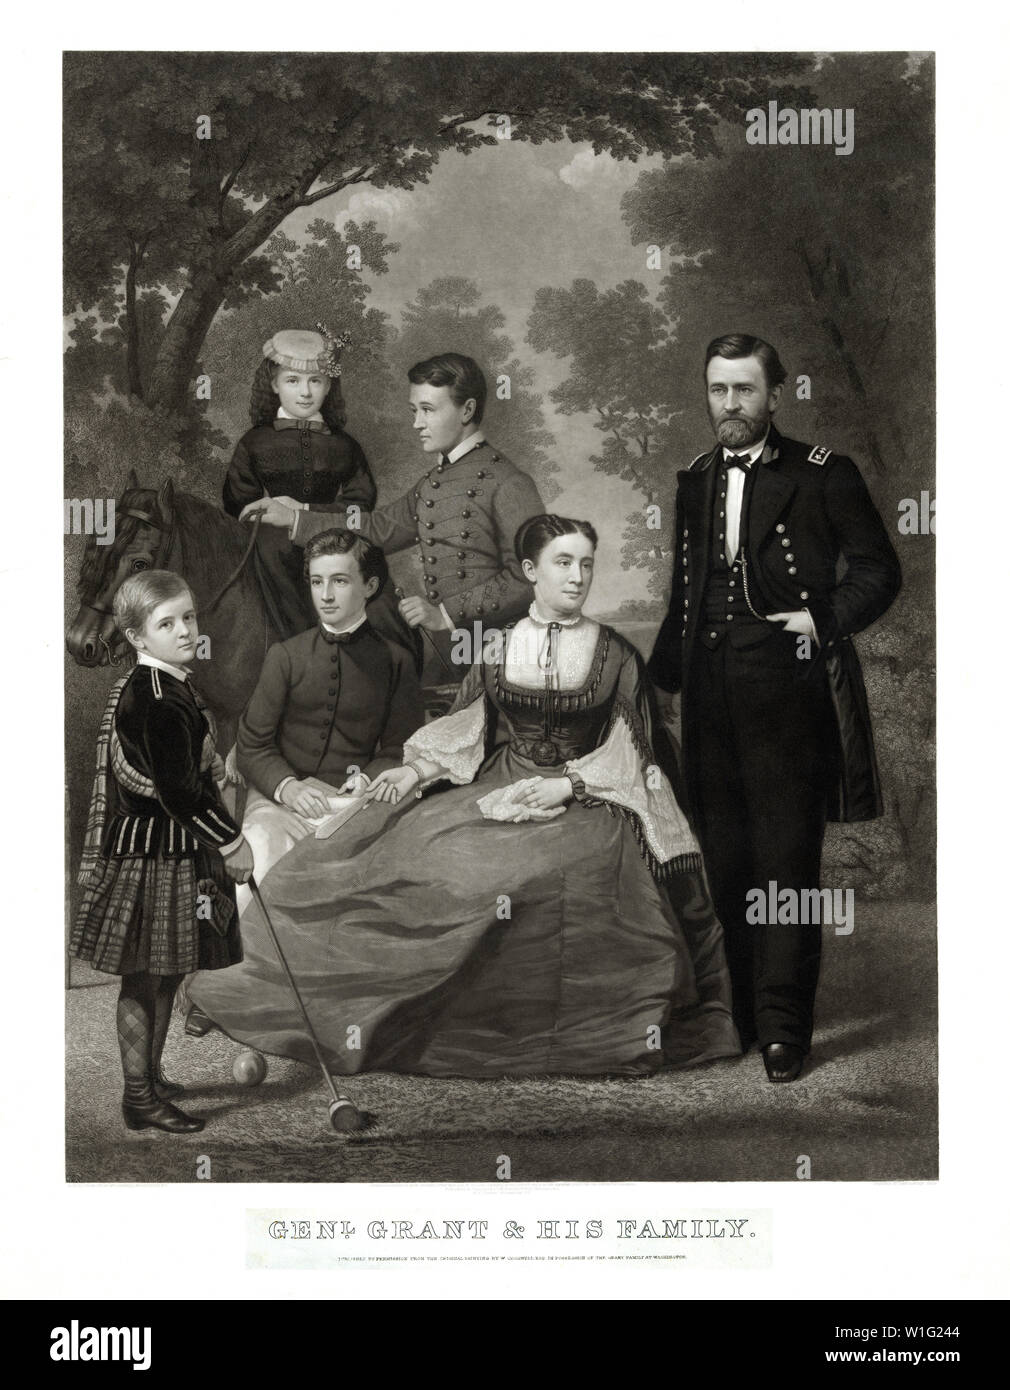 General Grant and his Family, Full-Length Portrait of Ulysses S. Grant standing next to his Wife and four Children, Painted from Life by William Cogswell, Engraving by John Sartain, 1868 Stock Photo